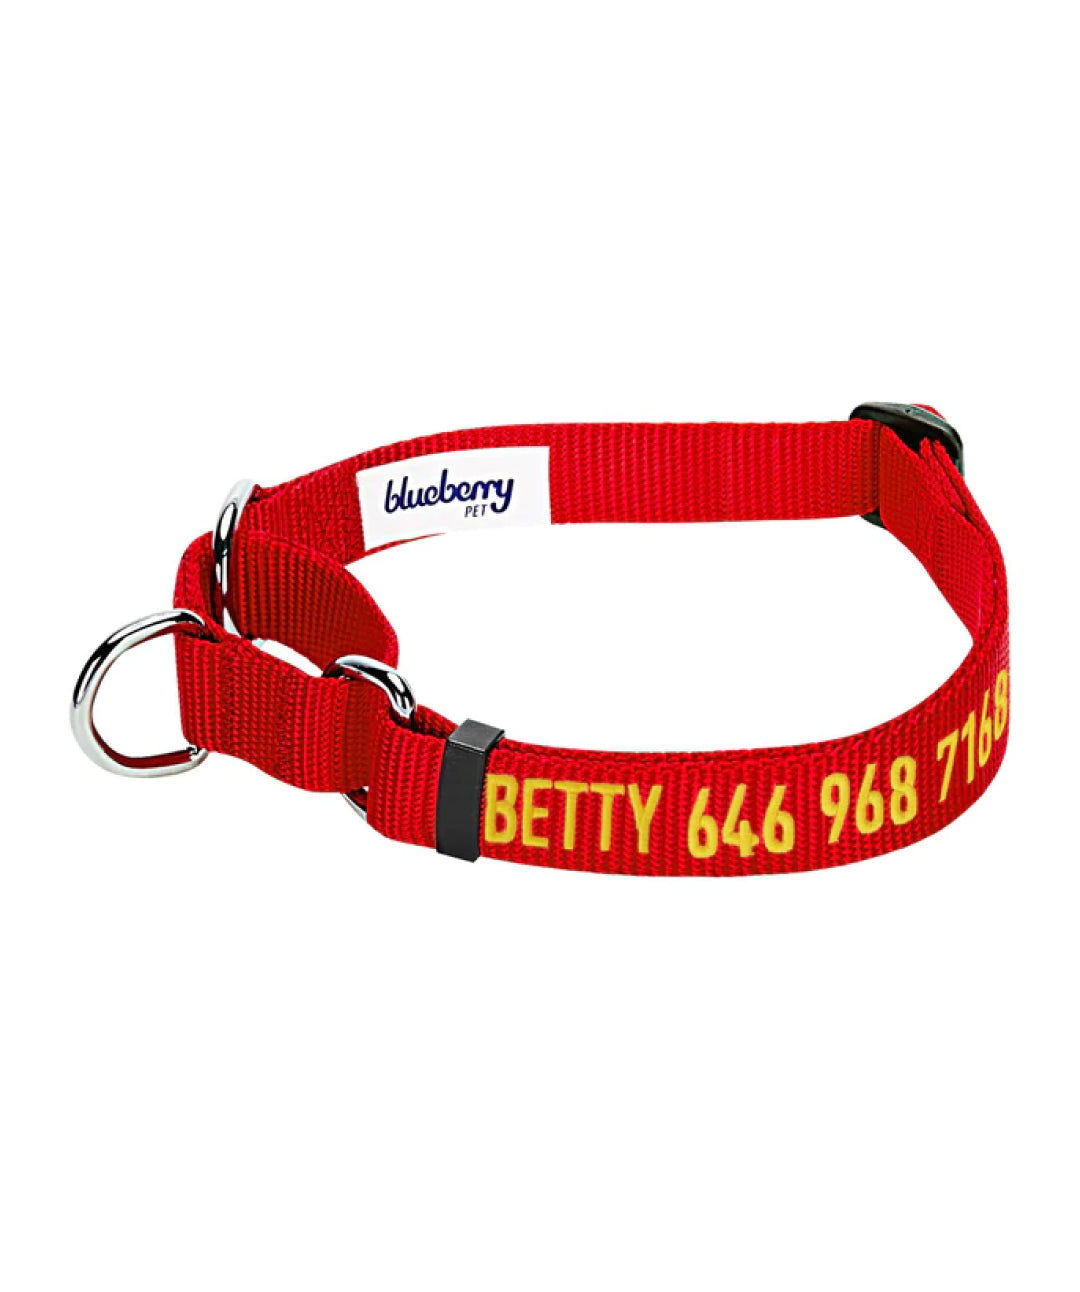 Blueberry Pet Nylon Martingale Personalized Dog Collar Collar Blueberry Pet Red S 